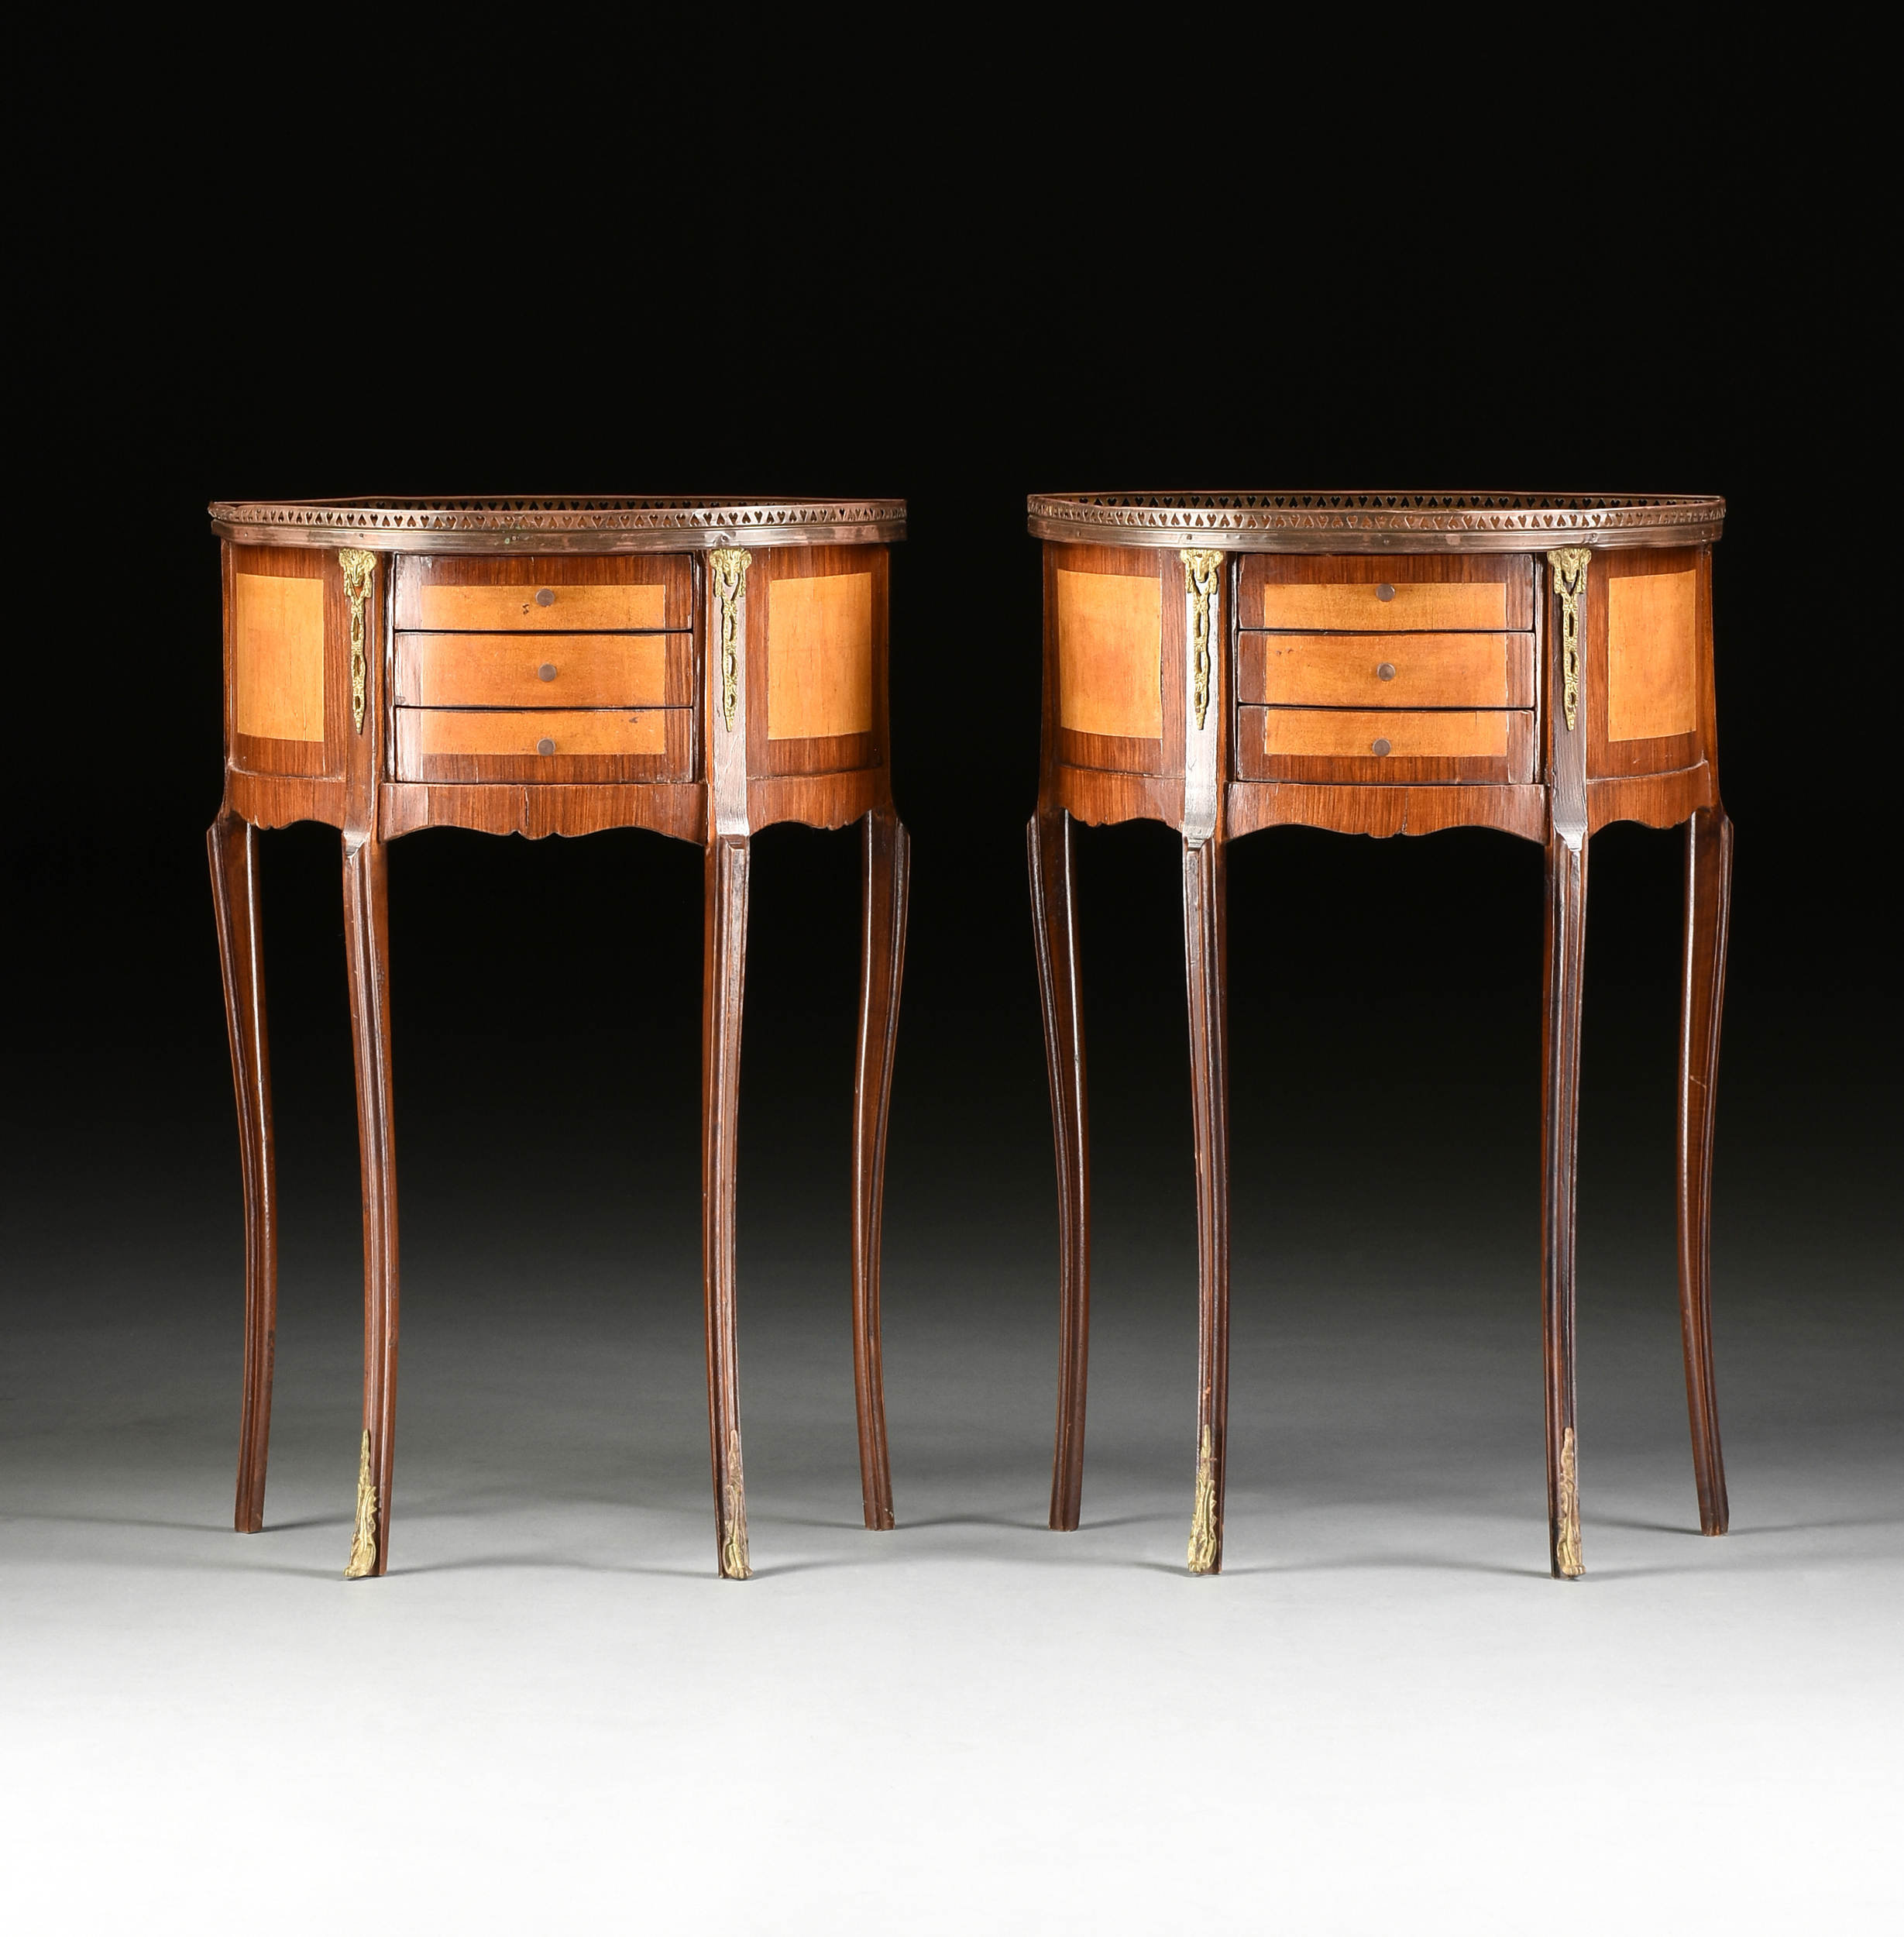 A PAIR OF LOUIS XV/XVI TRANSITIONAL STYLE BRONZE MOUNTED SATINWOOD AND MAHOGANY SIDE TABLES, 20TH